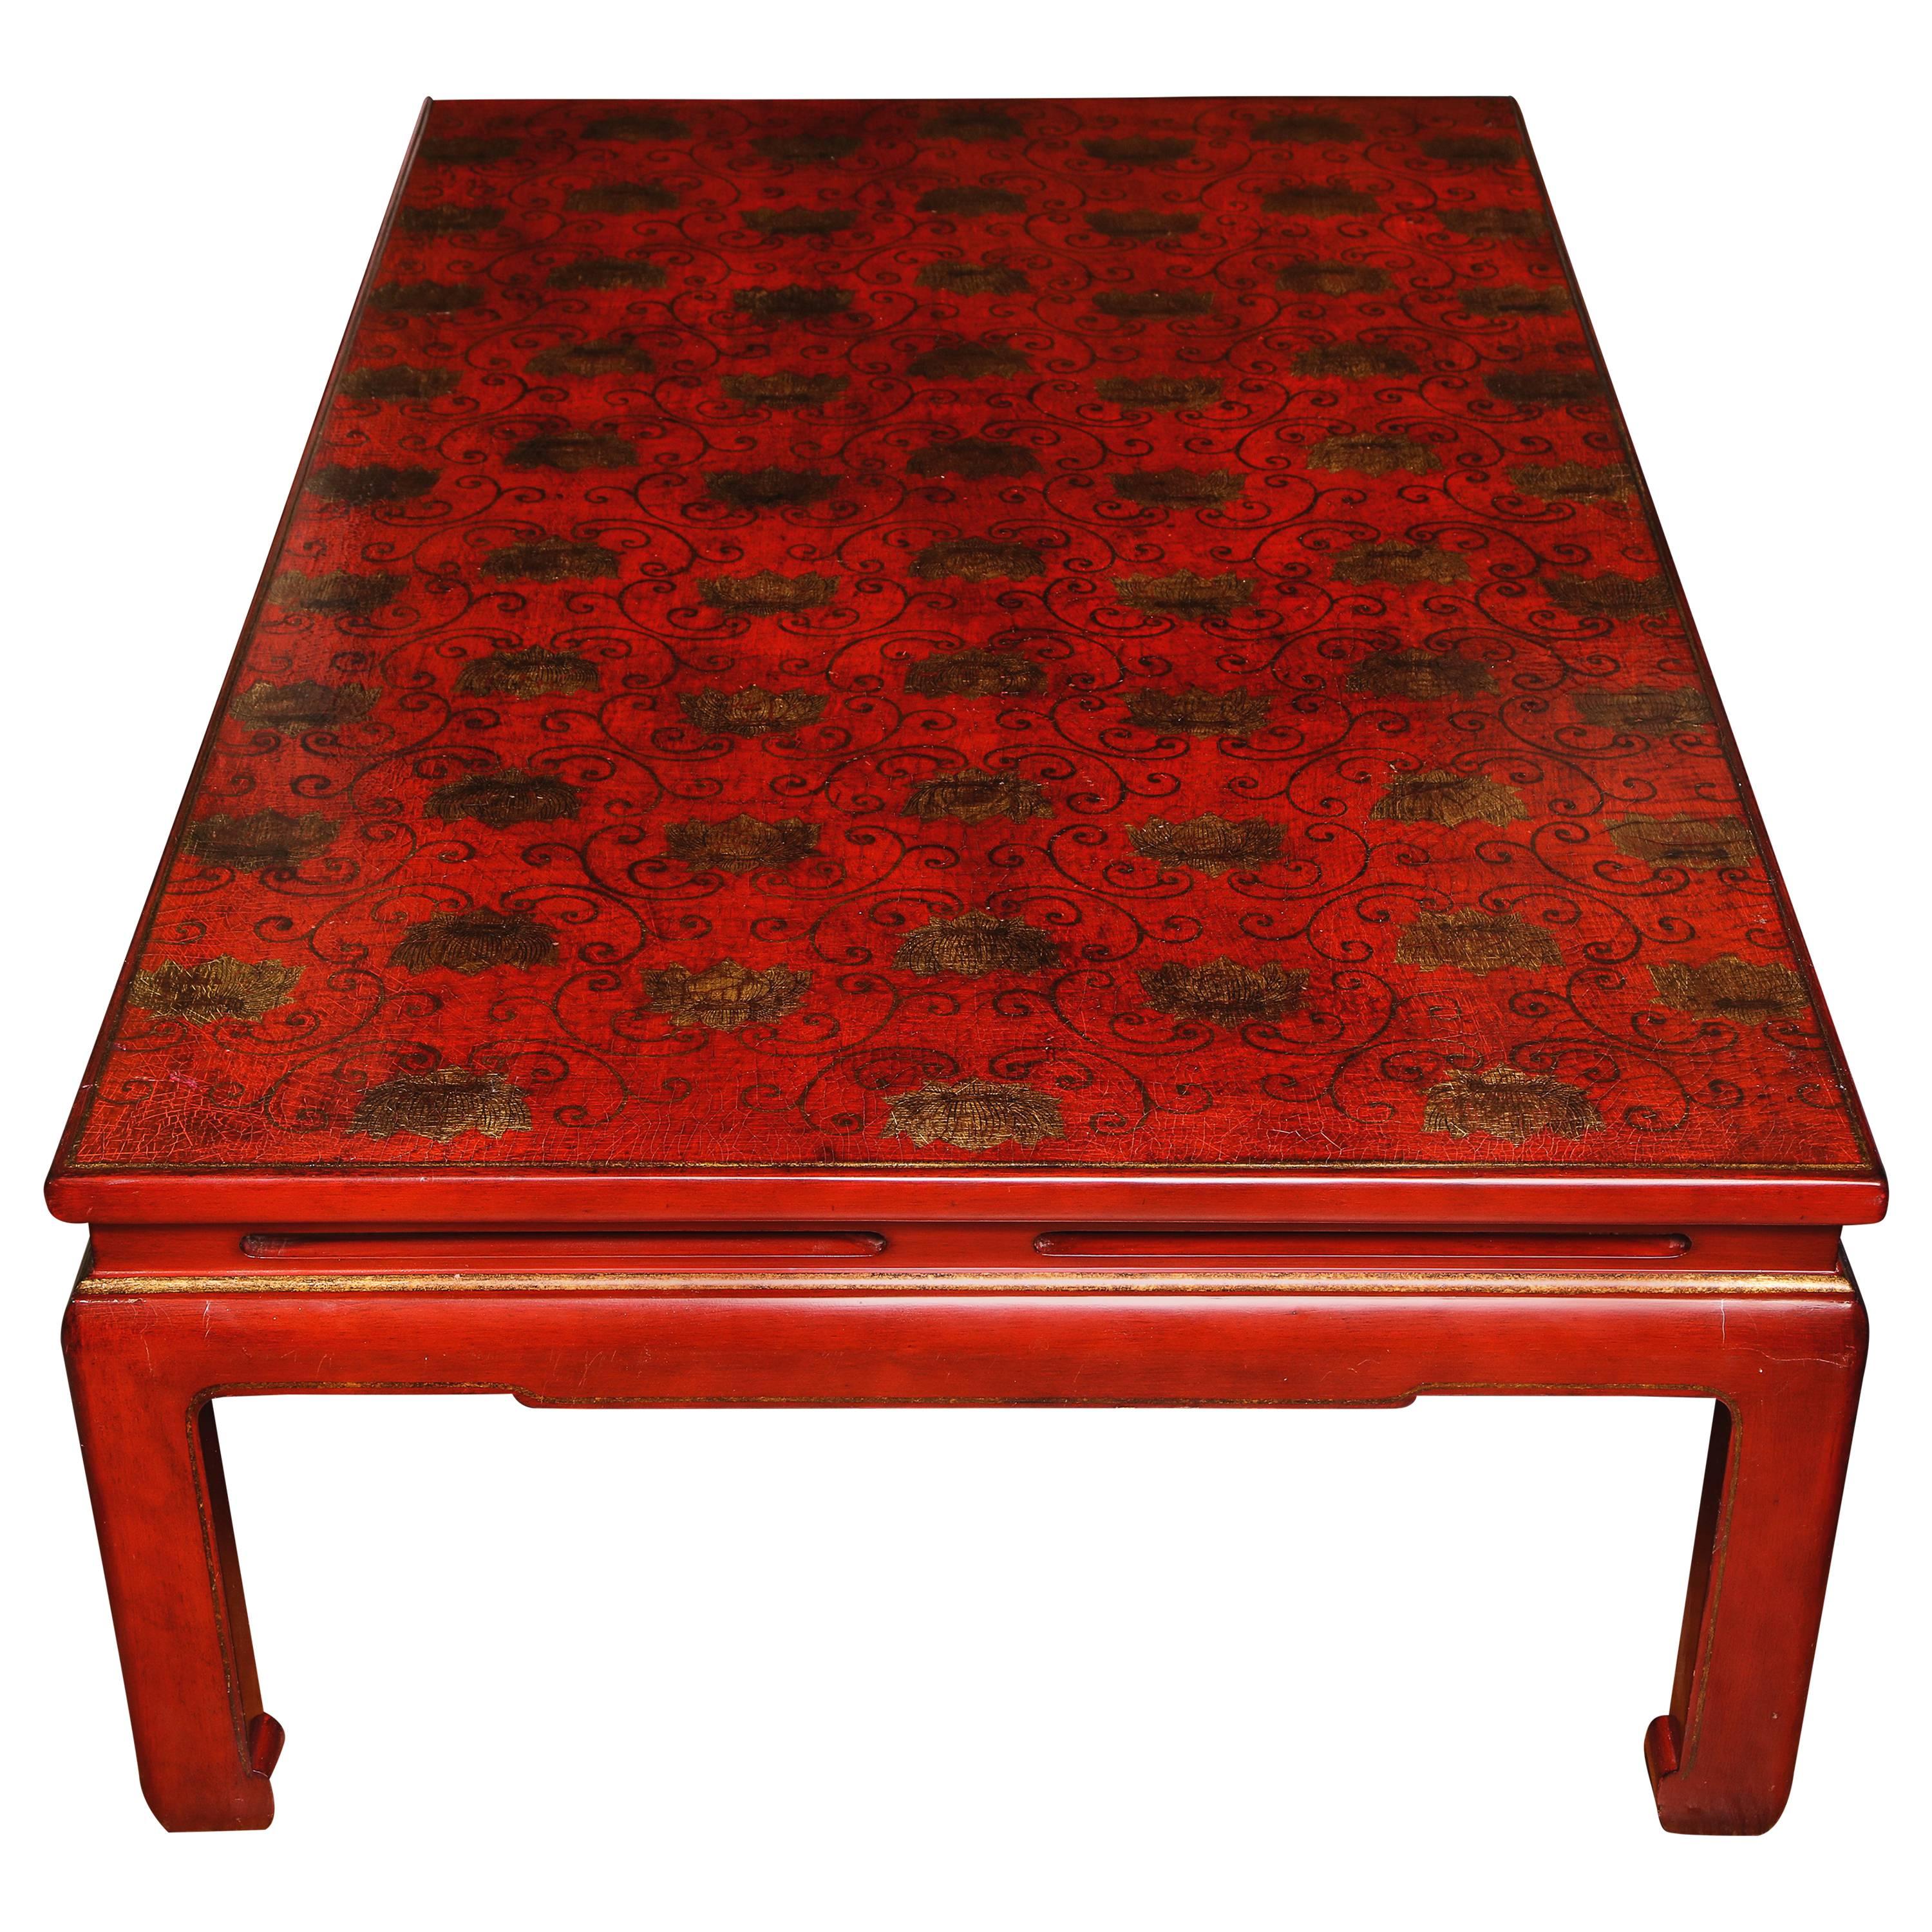 Red Lacquer Rectangular Coffee Table with Gilt Scroll & Lotus Flower Decoration For Sale